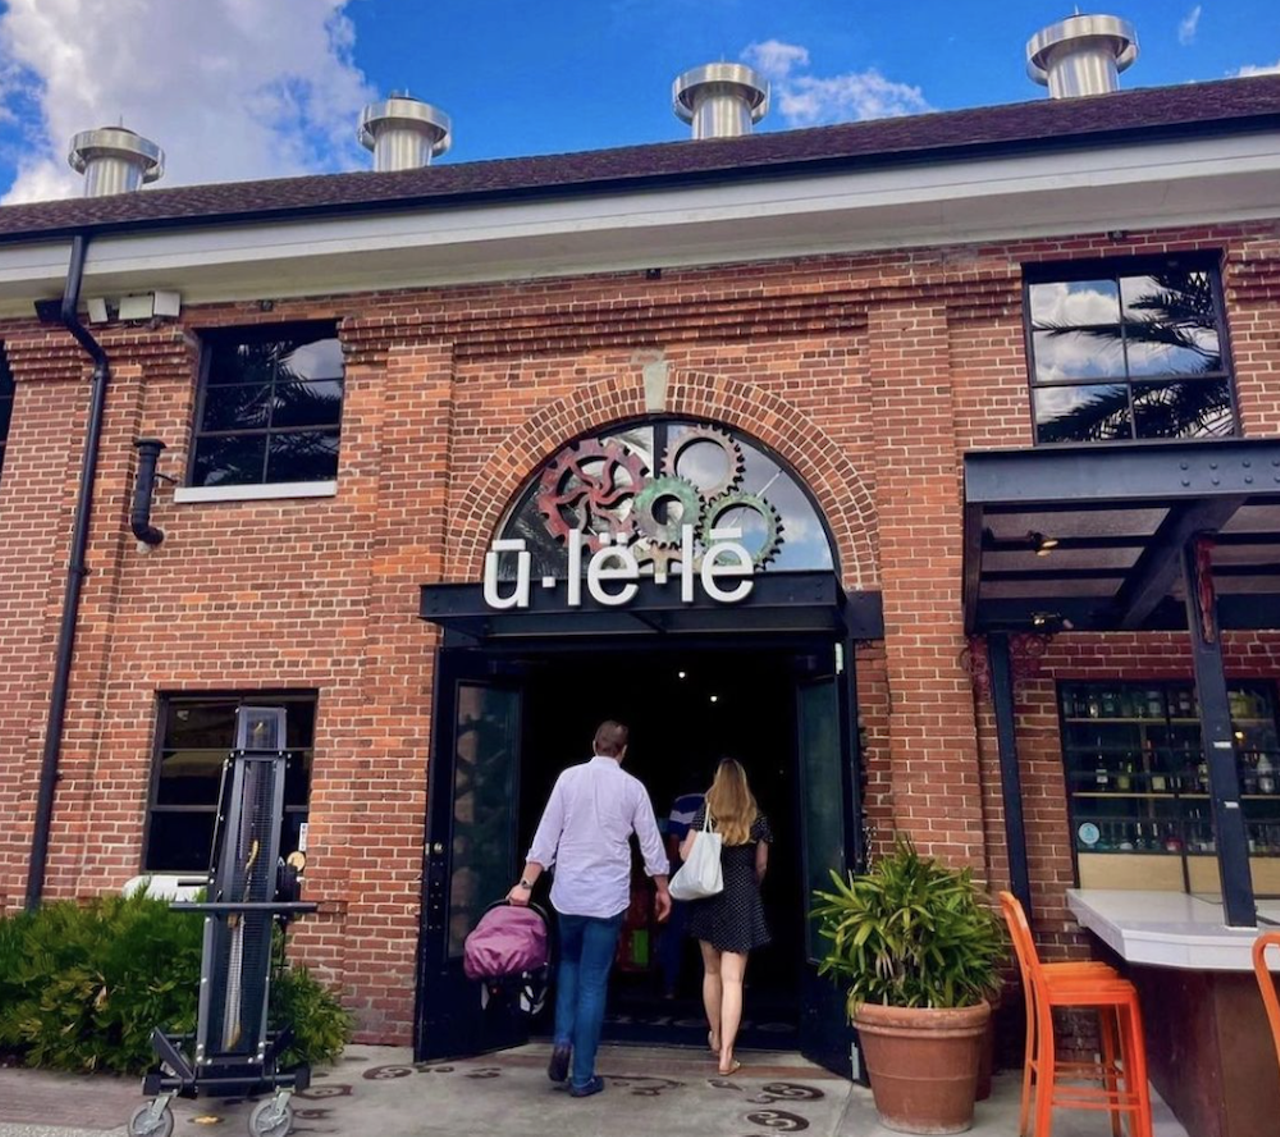 Ulele
1810 N Highland Ave., Tampa, 813-999-4952
This Native-inspired eatery offers a vibrant fusion of ingredients to create this riverside treasure. Outdoor seating has a view of the Tampa skyline almost as good as the jalapeño corn beer muffins and grilled oysters. 
Photo via Ulele/Instagram